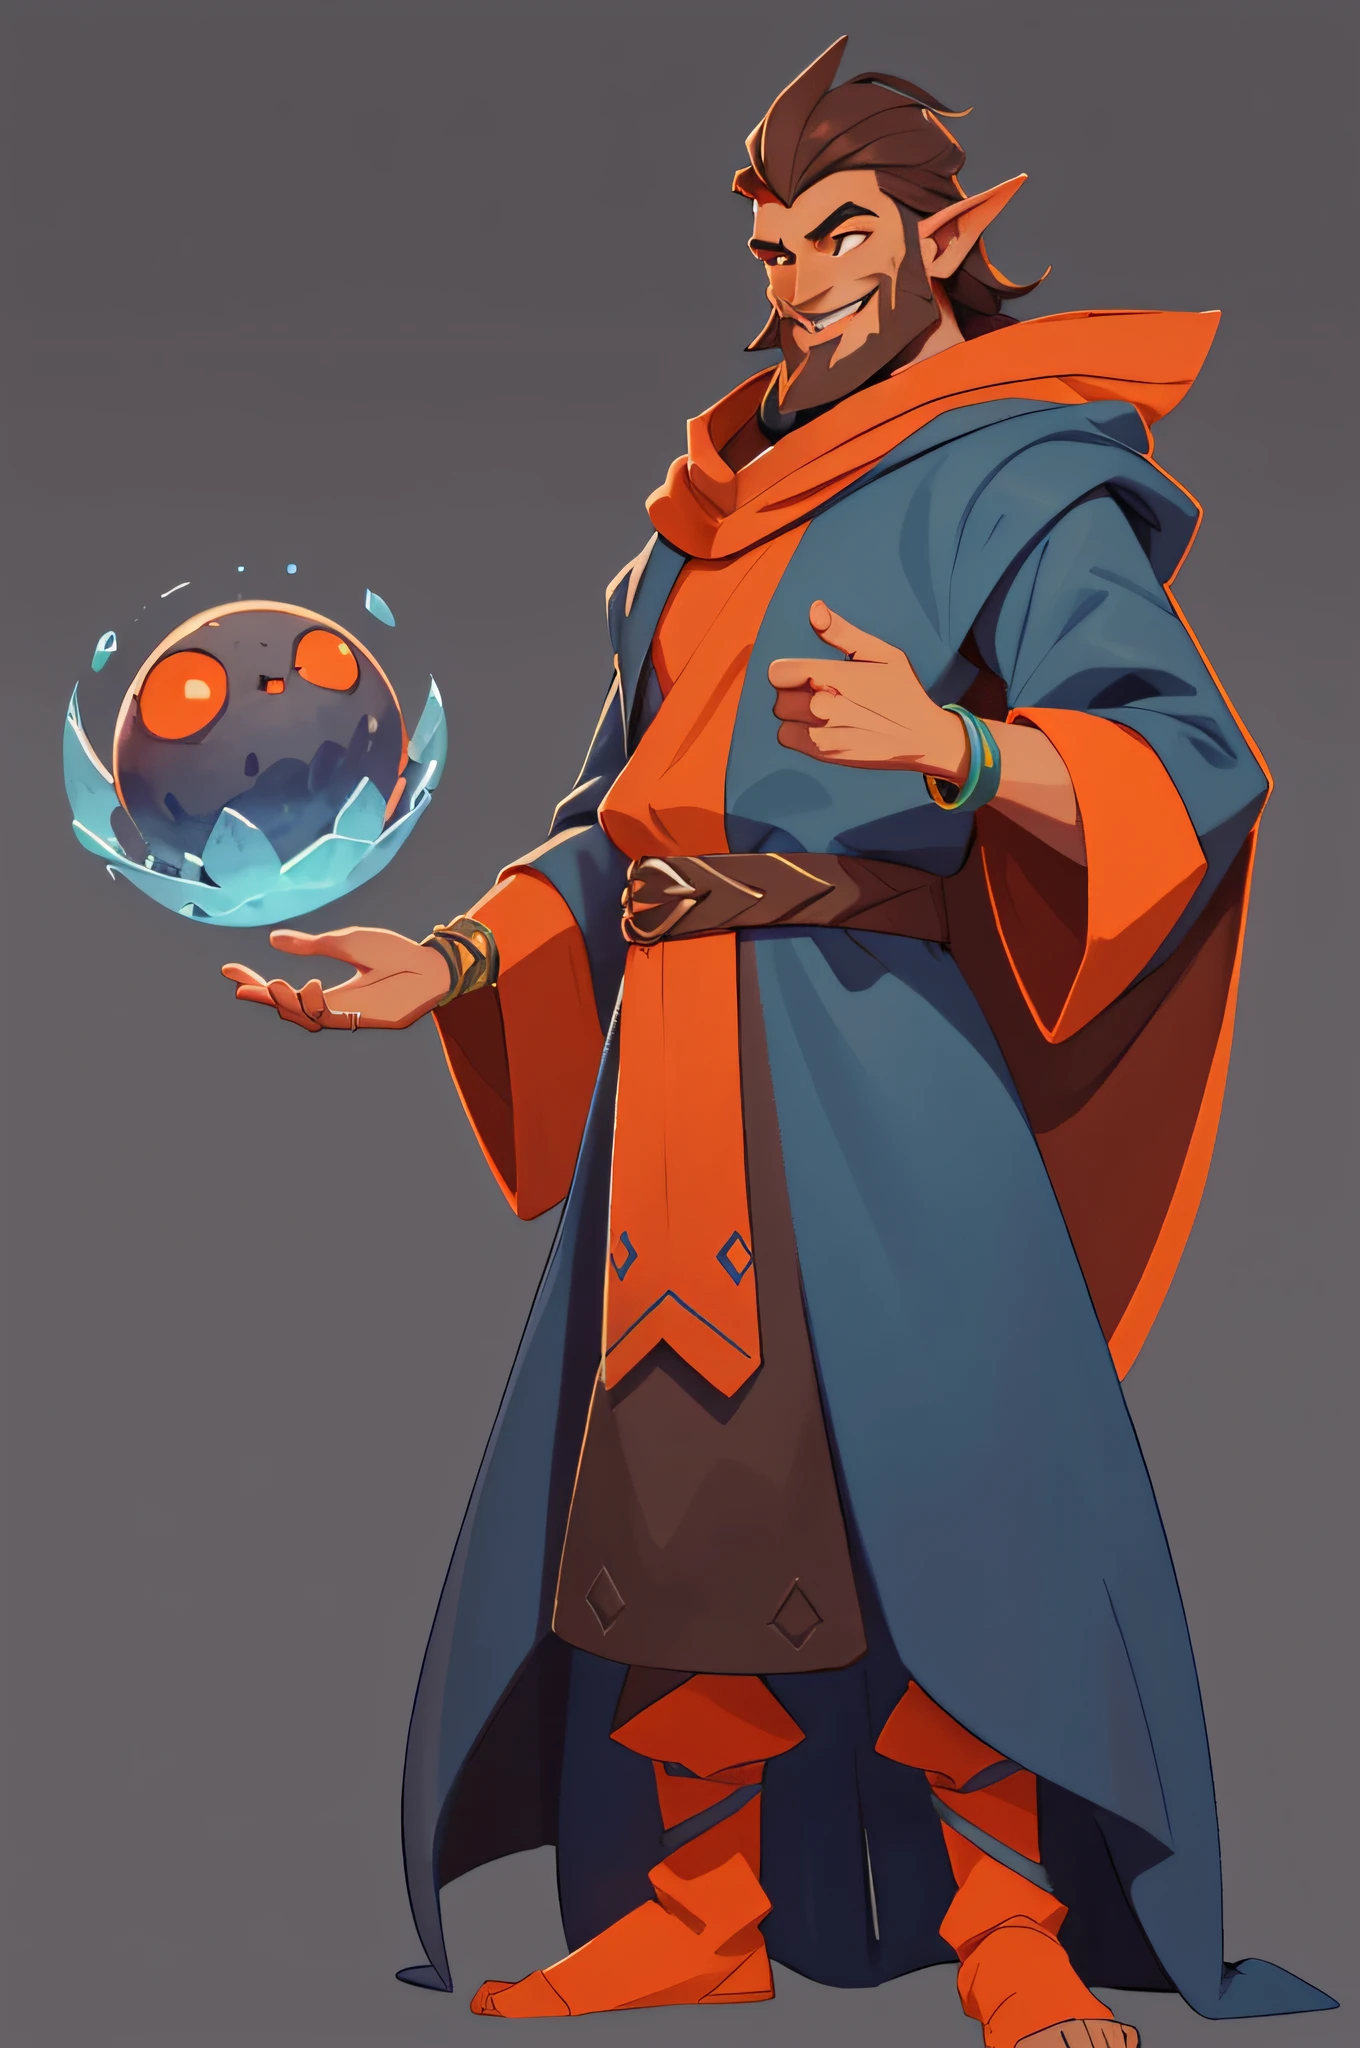 1boy, monster with DARK ORANGE SKIN, pointed ears, broad nose, BROWN BEARD, wearing wizard robes(blue and orange), mstoconcept art, european and american cartoons, game character design, solo, BACKGROUND, GRAY BACKGROUND, WIZARD, FULL BODY, STANDING, SMILING, ROBE, HOOD, JEWELRY, BRACELET, WIDE SLEEVES, BELT, GEMSTONE, LONG SLEEVES,